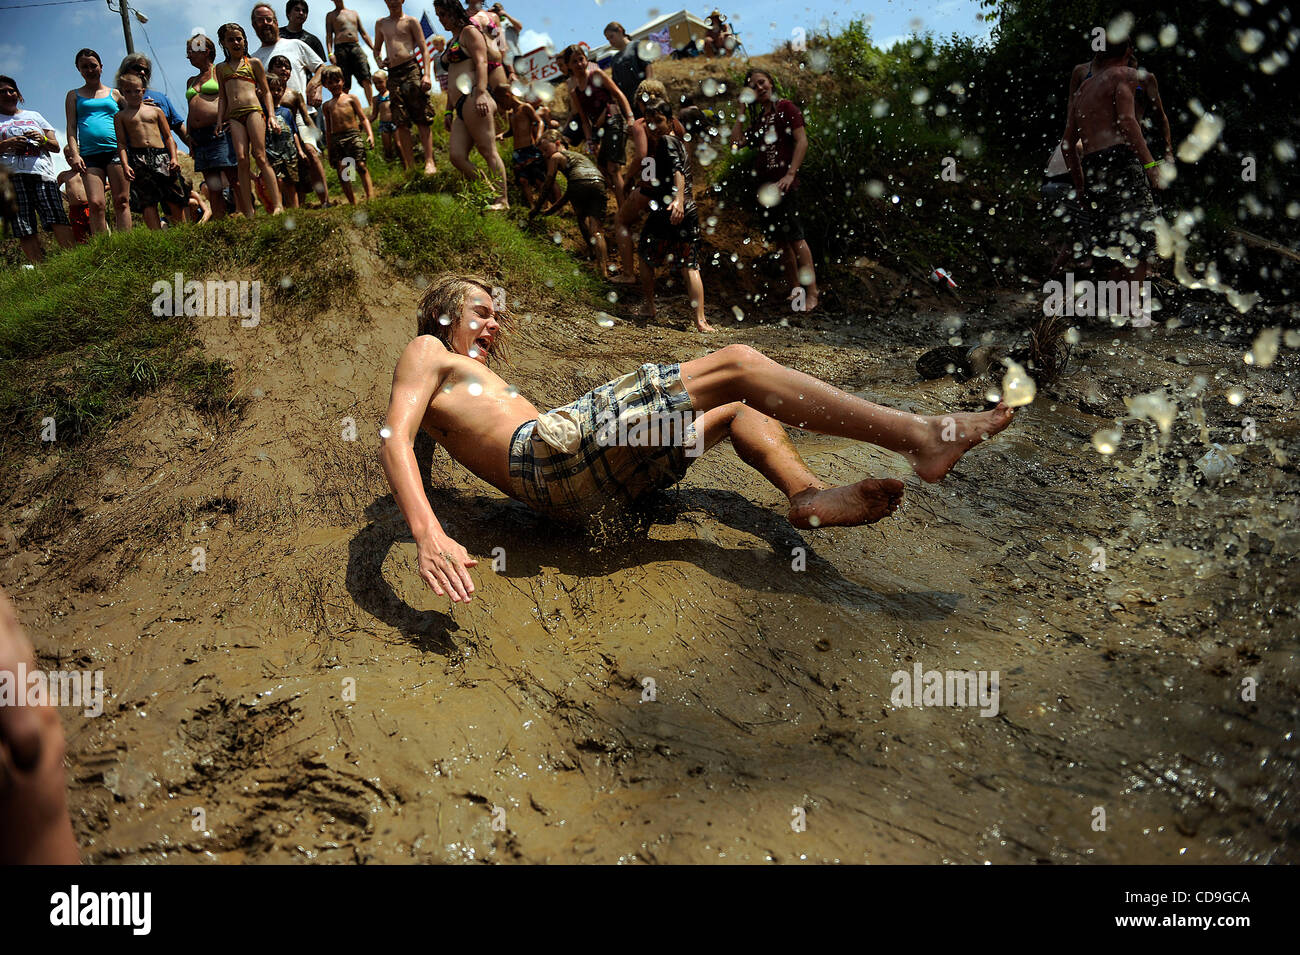 SATURDAY JULY 10, 2010 EAST DUBLIN, GEORGIA - A Redneck Games participant slides down a muddy hill into the river at Buckeye Park during the Redneck Games in East Dublin, Georgia. The games started in 1996 as spoof on the Olympics which were being held in Atlanta, Georgia at the time. participants c Stock Photo